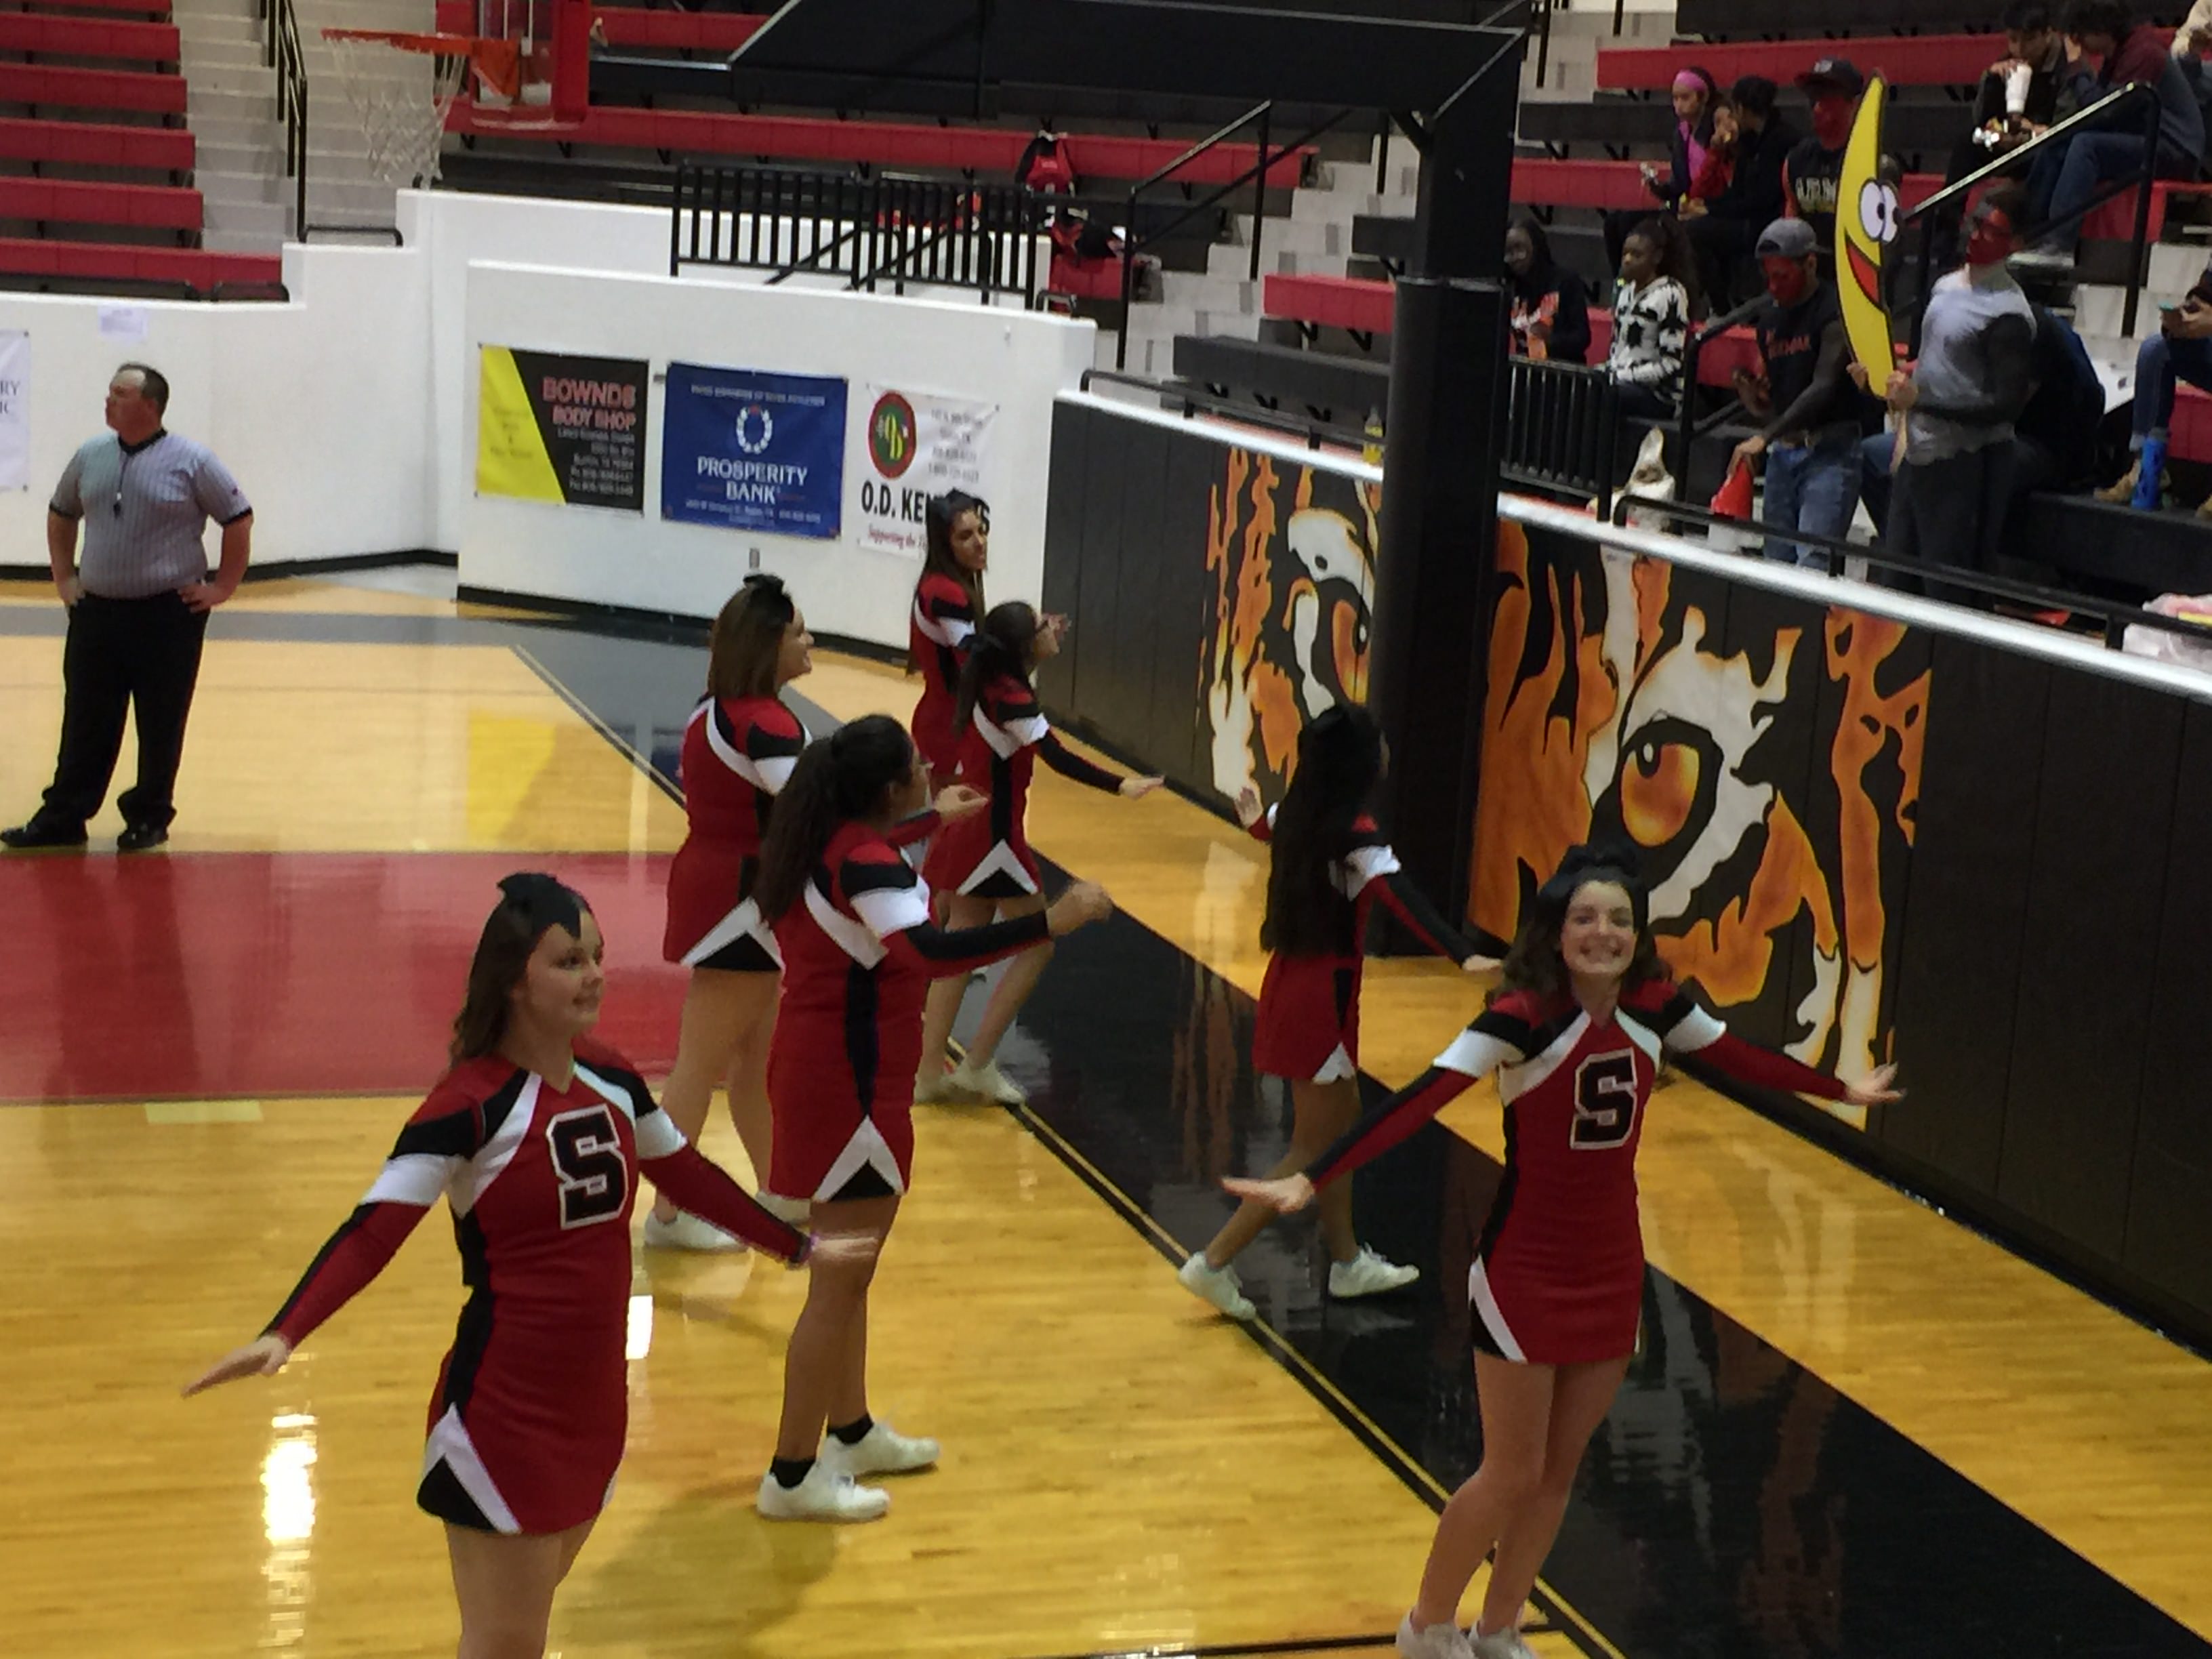 Cheerleaders enjoy our scoring early in the game.